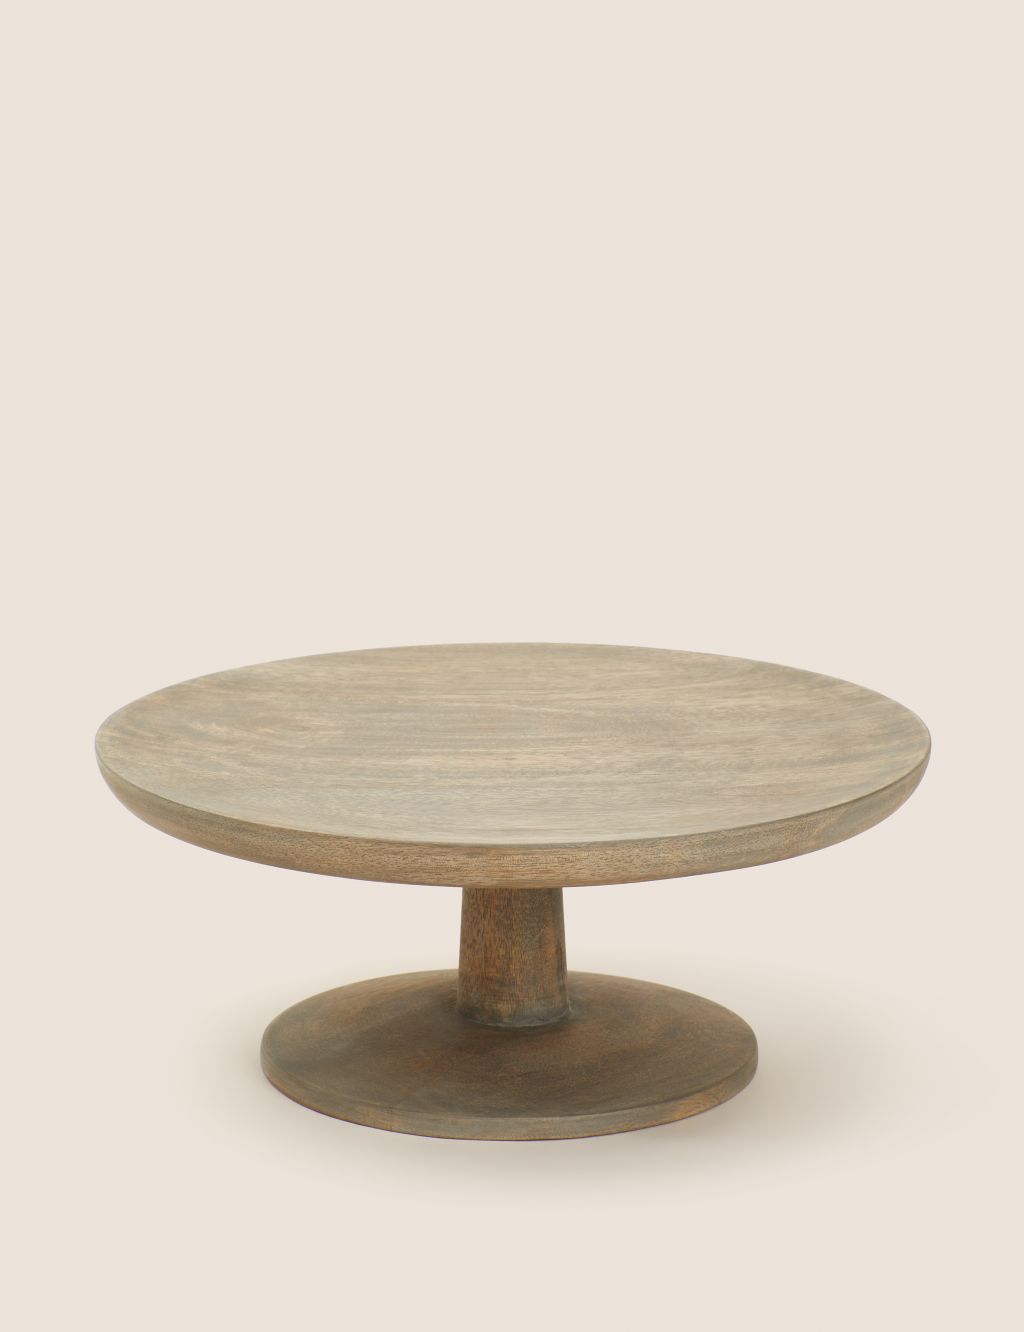 Wooden Cake Stand image 1